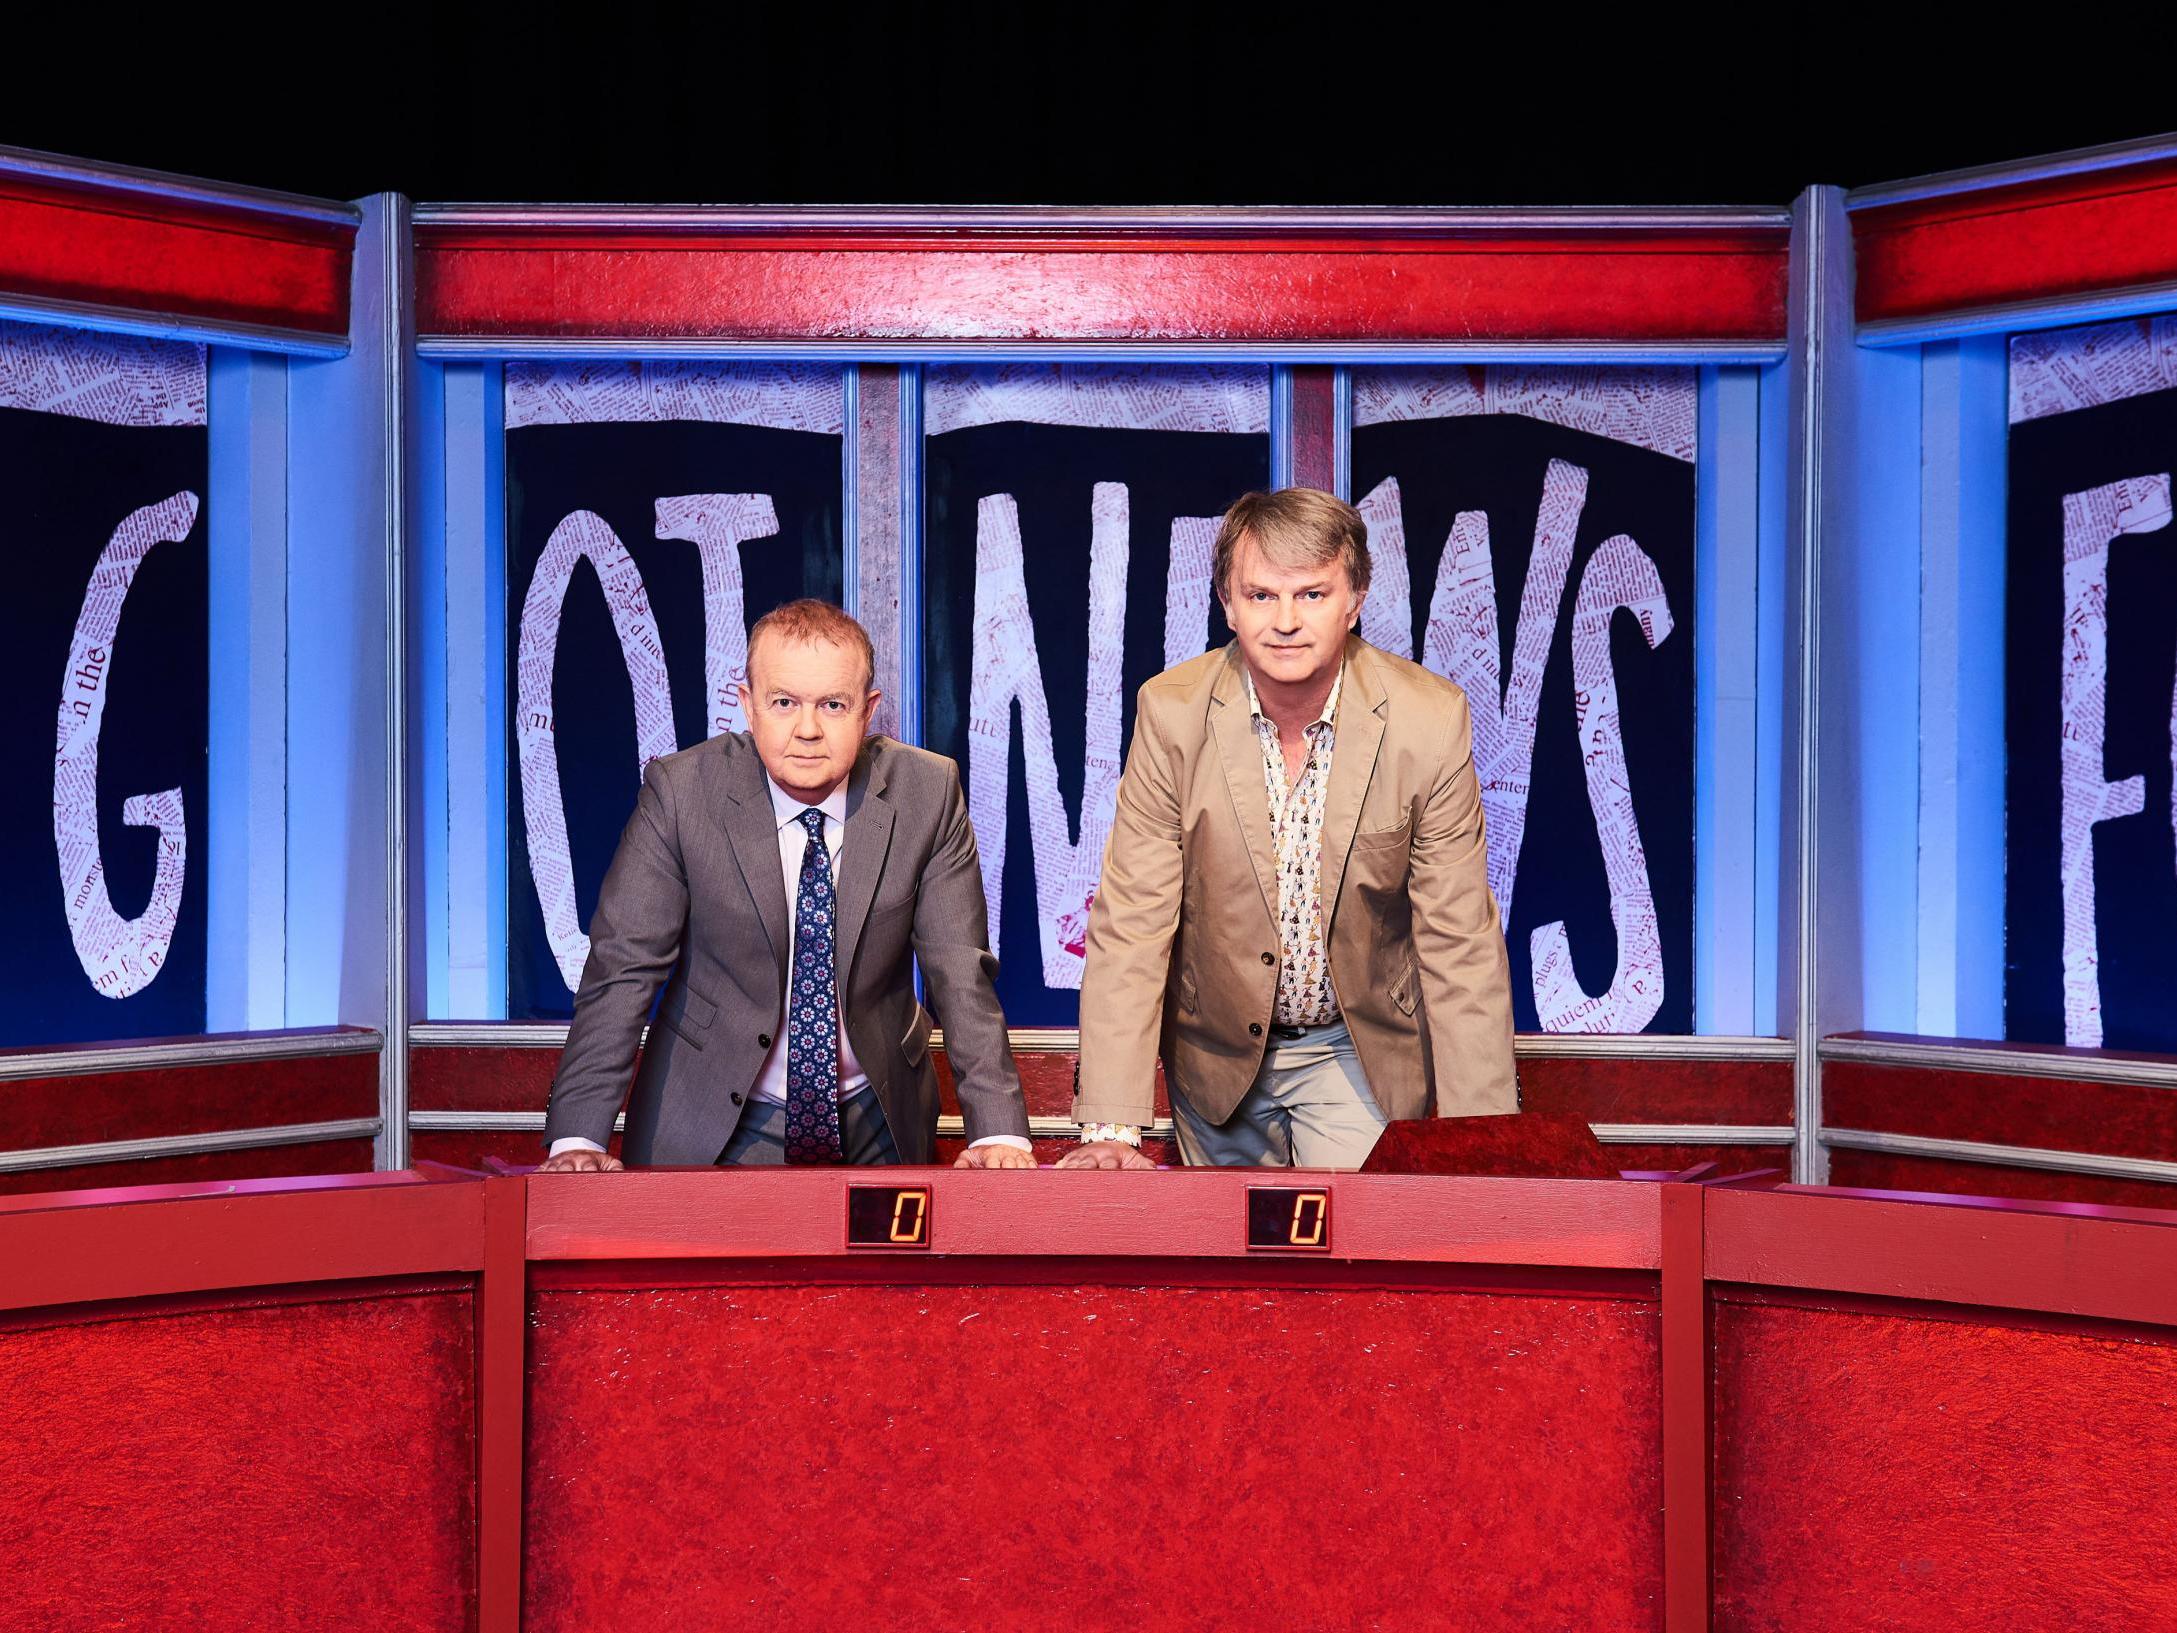 Ian Hislop and Paul Merton on 'Have I Got News for You'